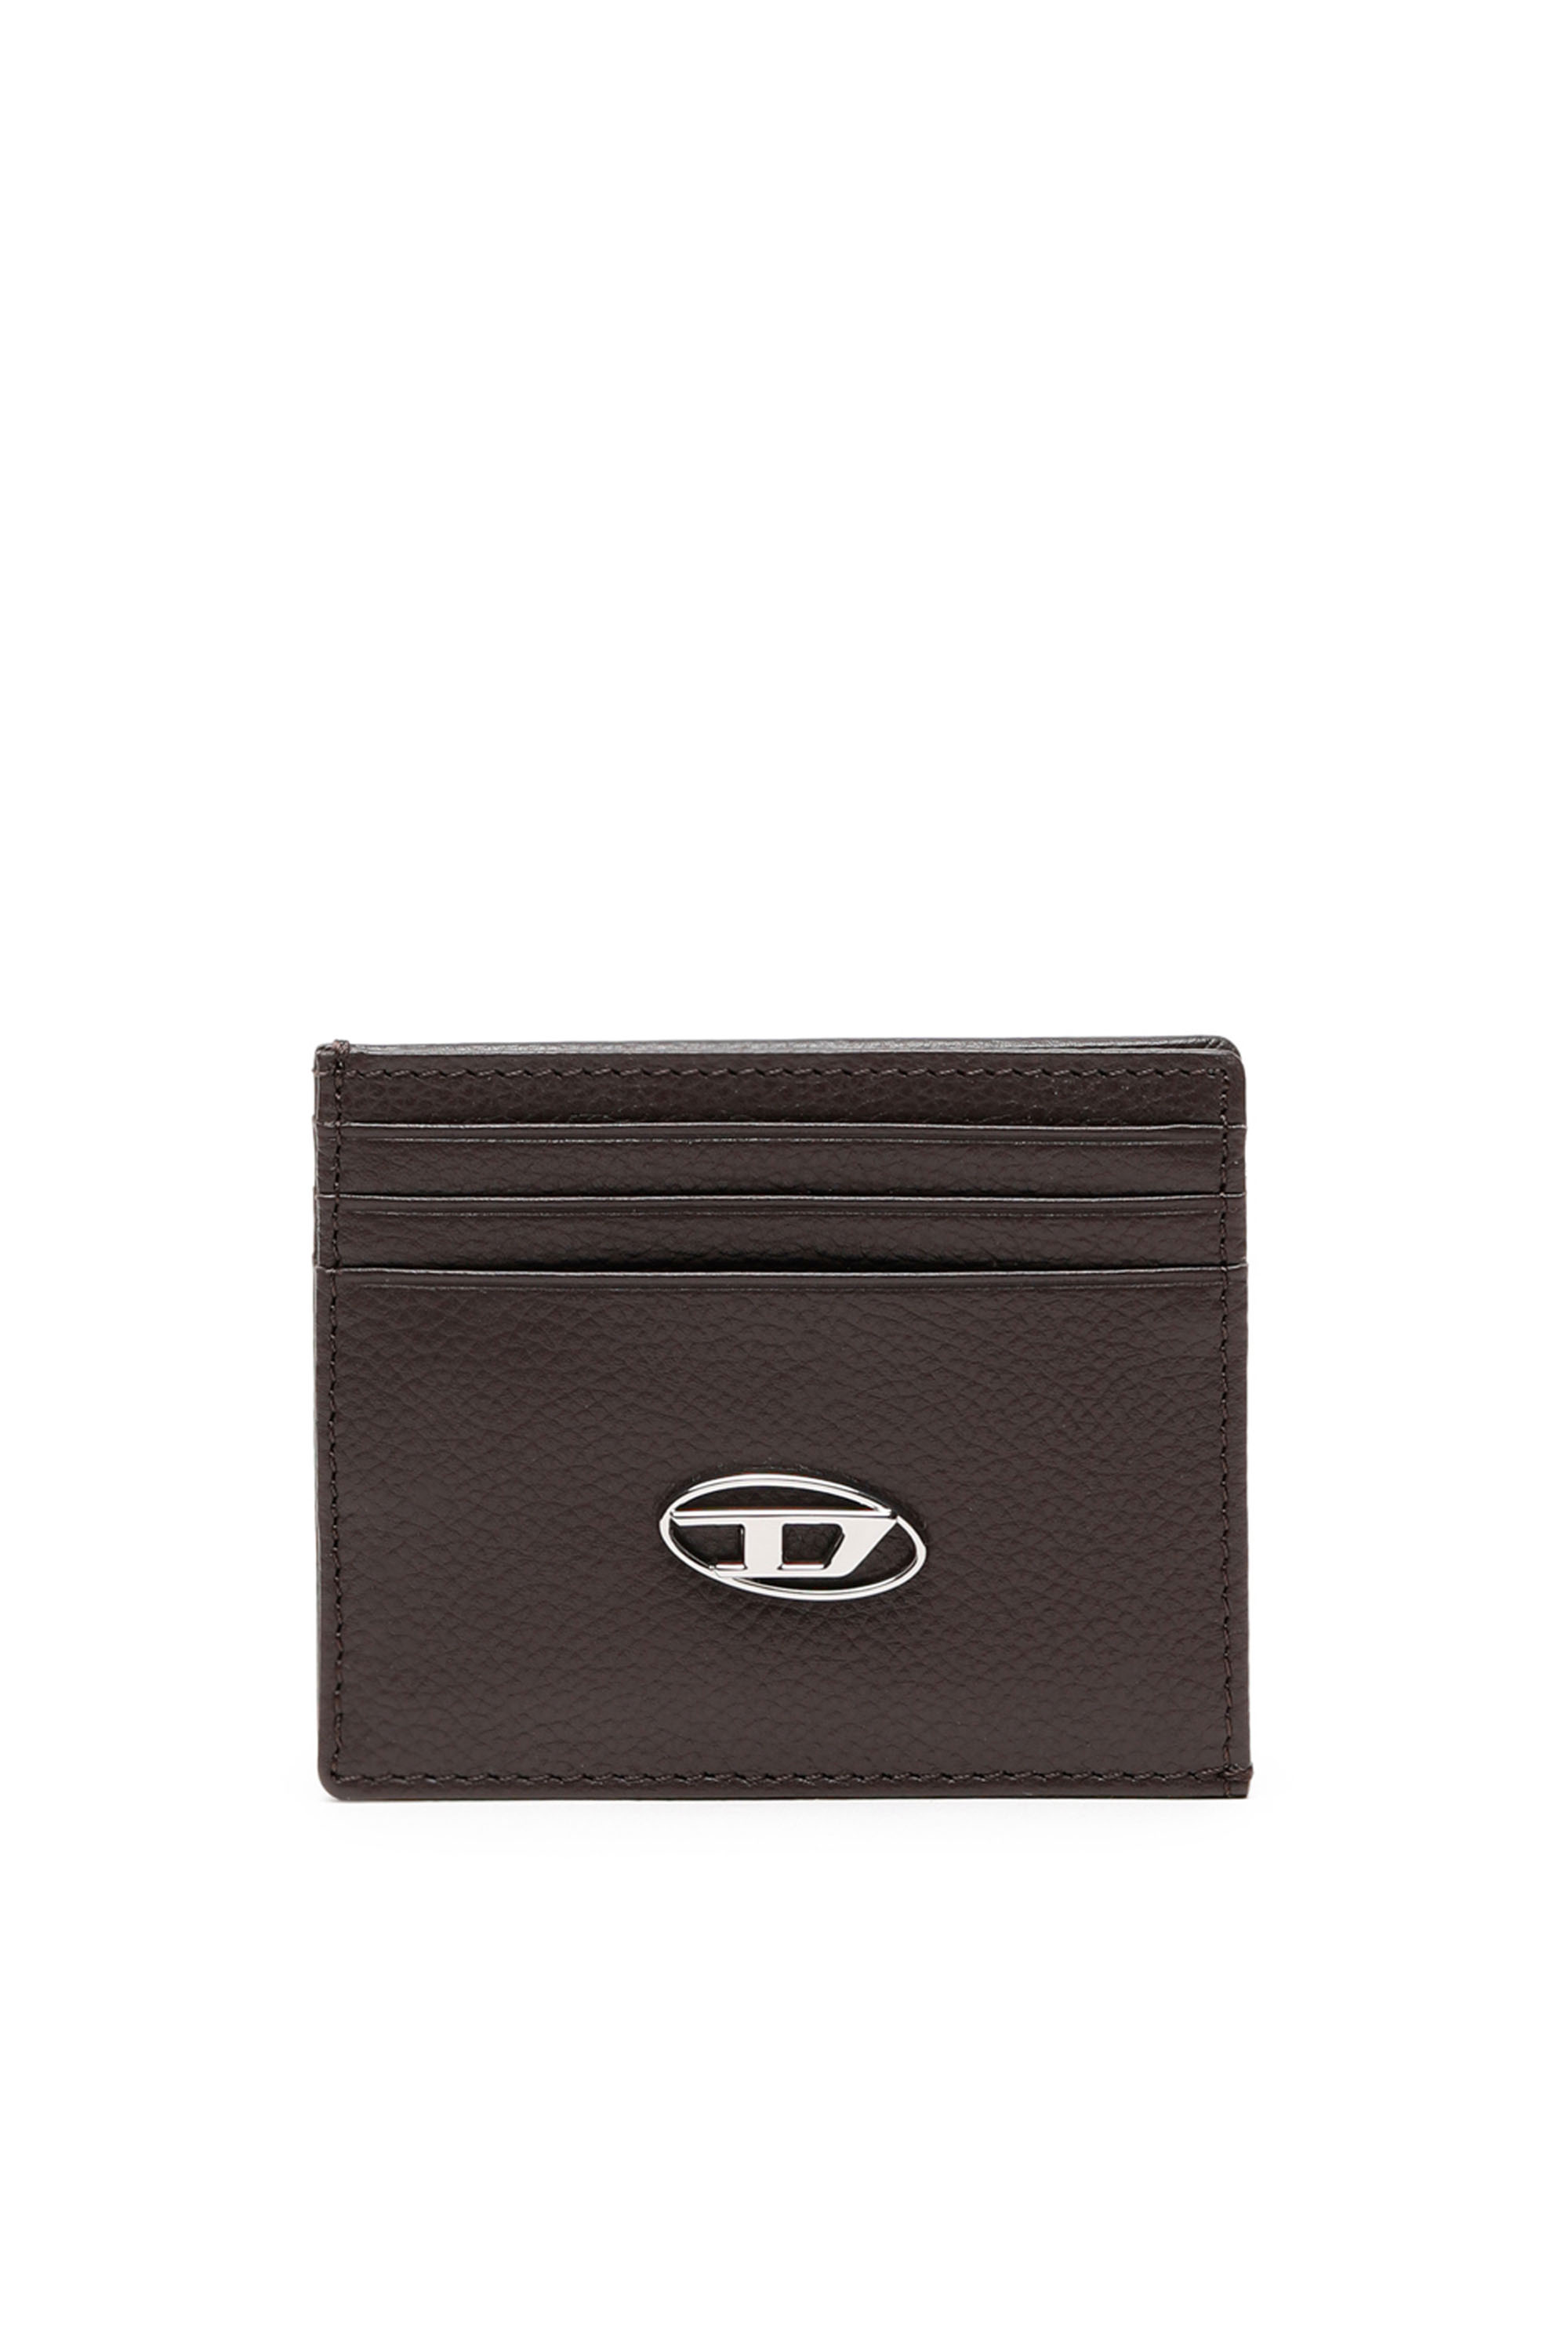 Diesel Card Case In Grained Leather In Brown